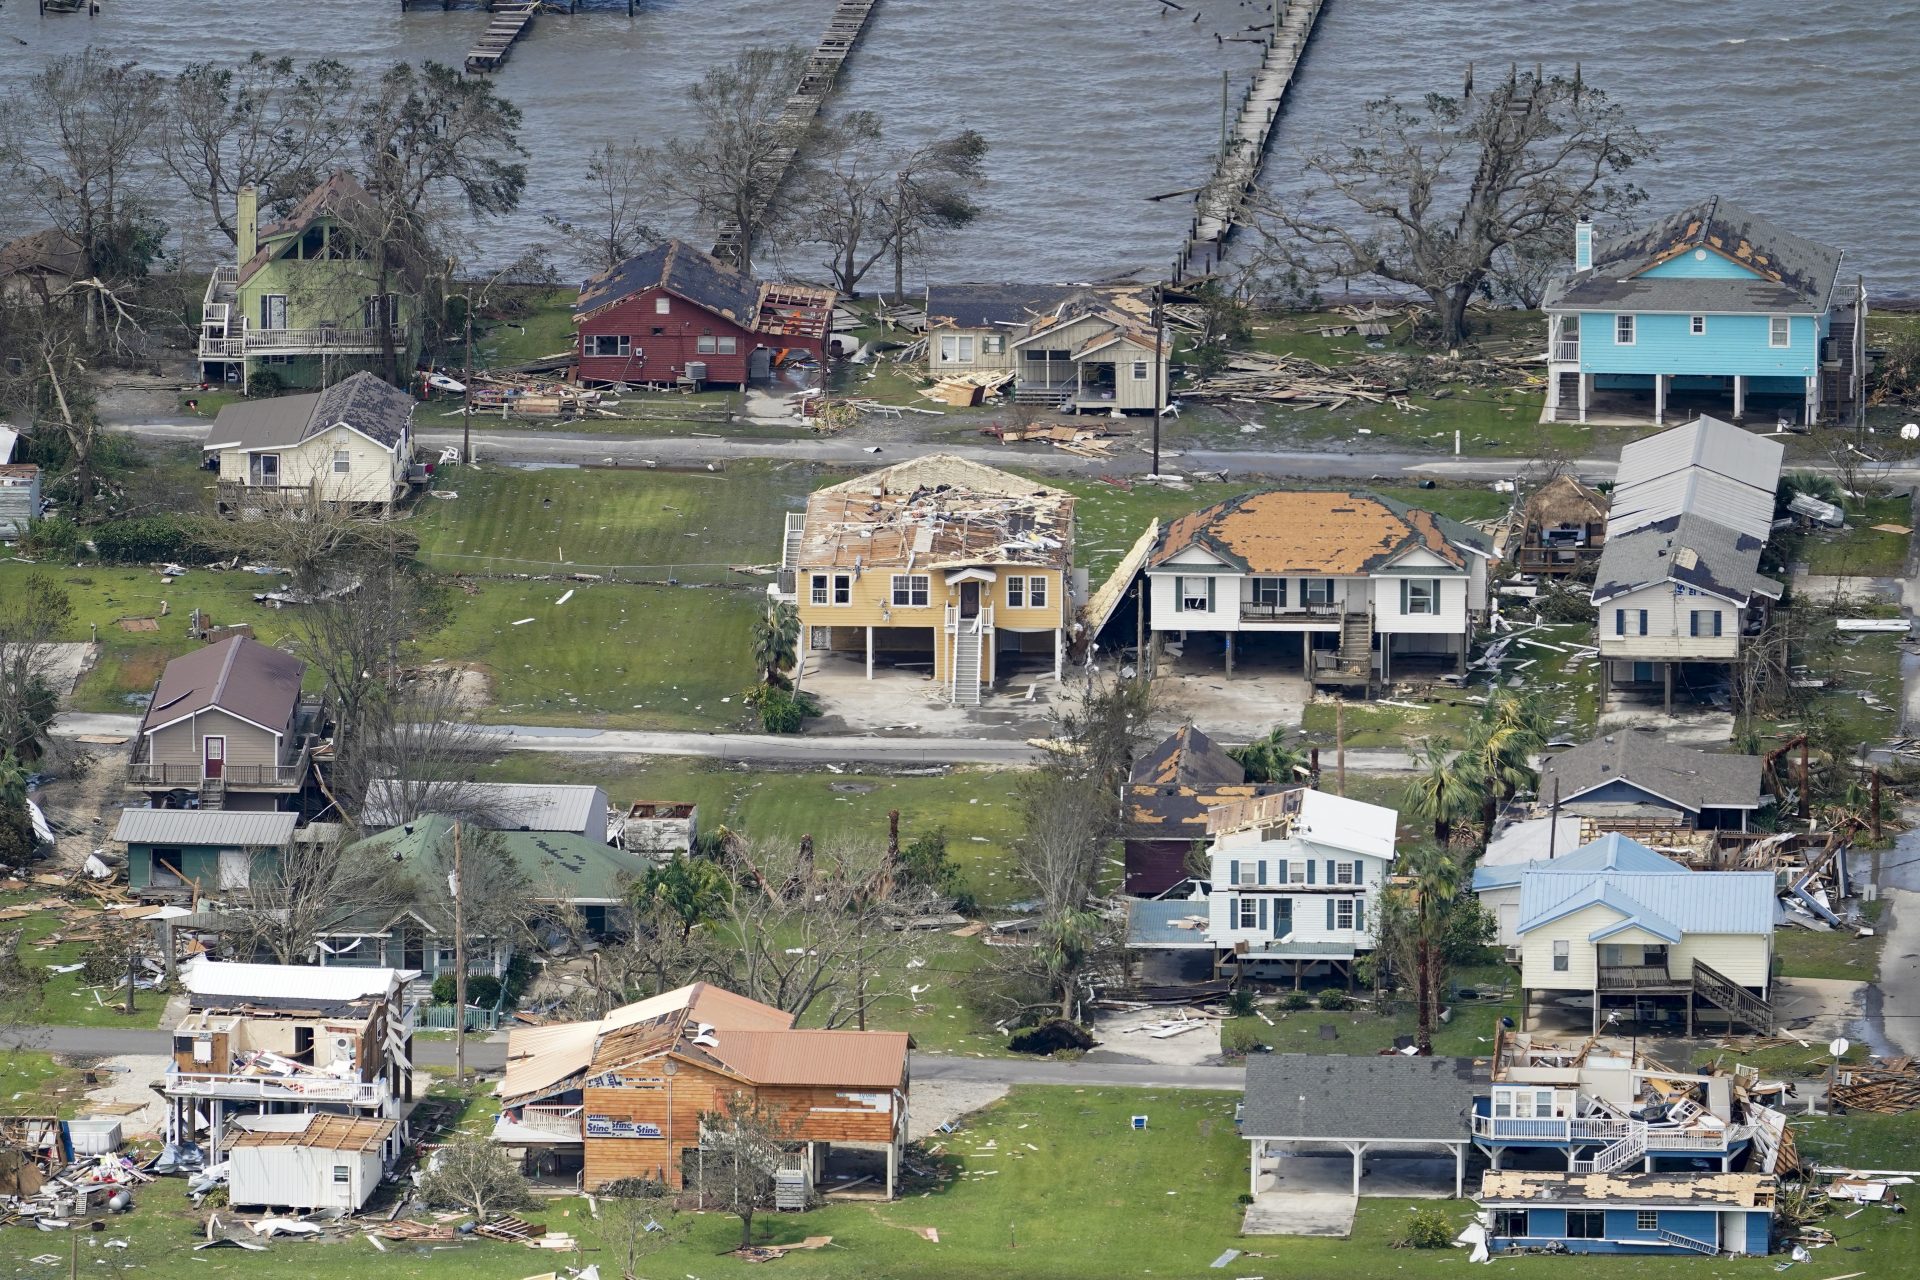 Buildings and homes are damaged in the aftermath of Hurricane Laura Thursday, Aug. 27, 2020, near Lake Charles, La.